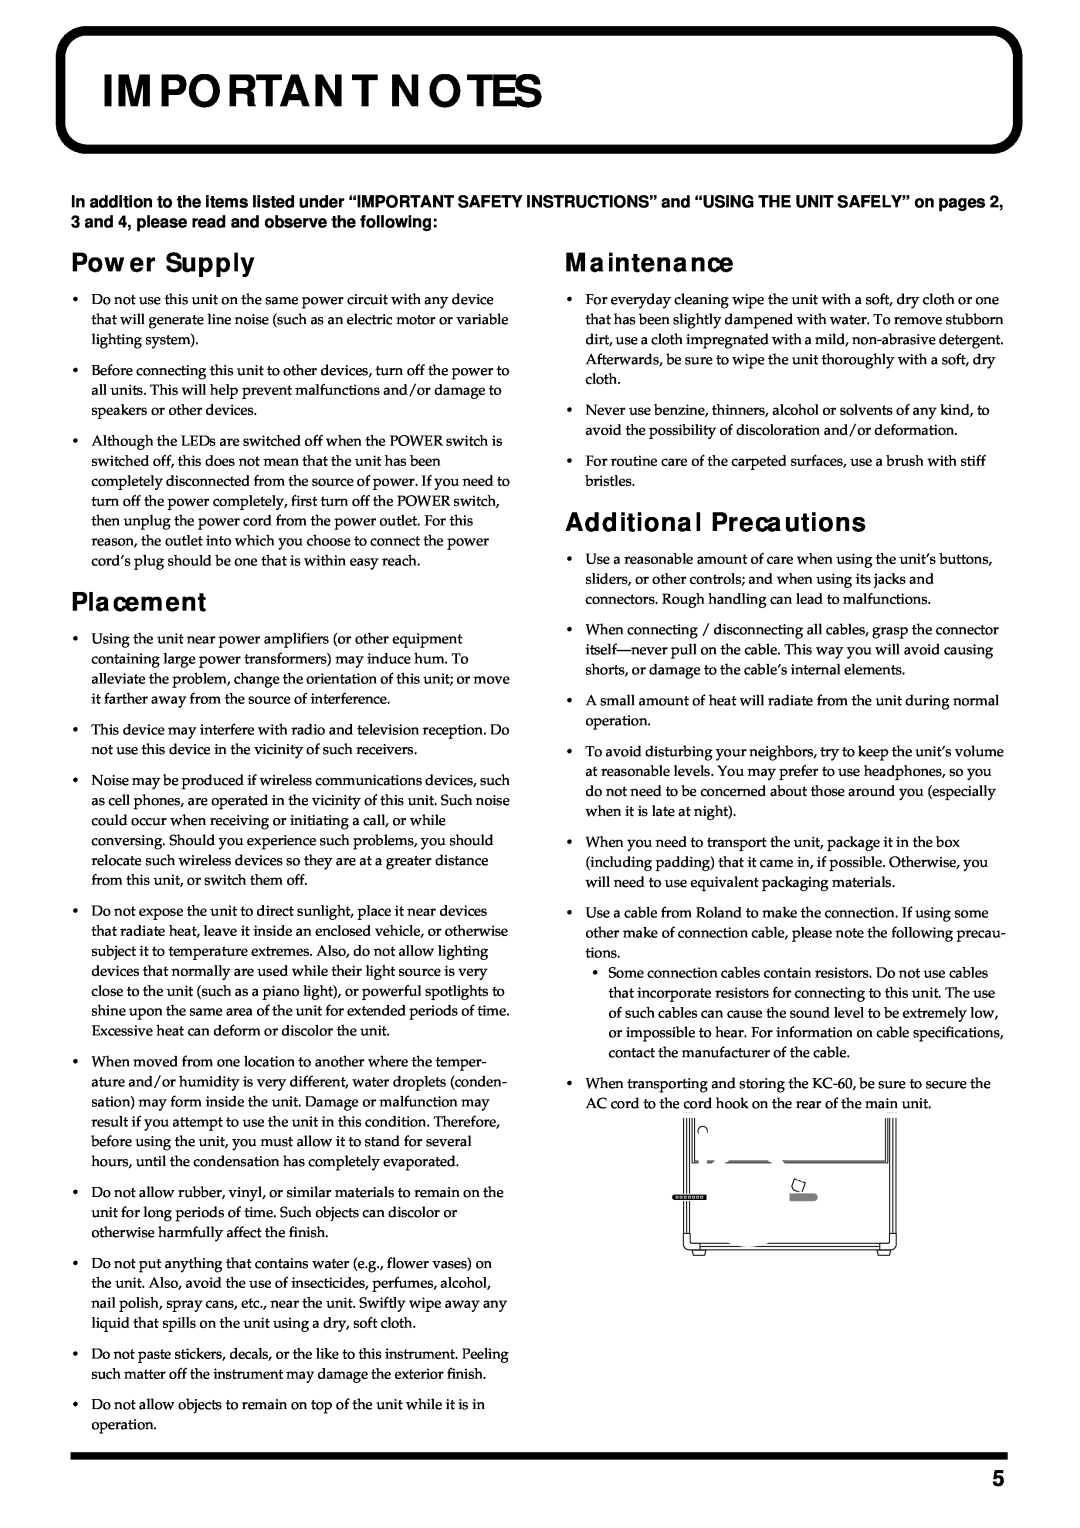 Roland KC-60 owner manual Important Notes, Power Supply, Placement, Maintenance, Additional Precautions 